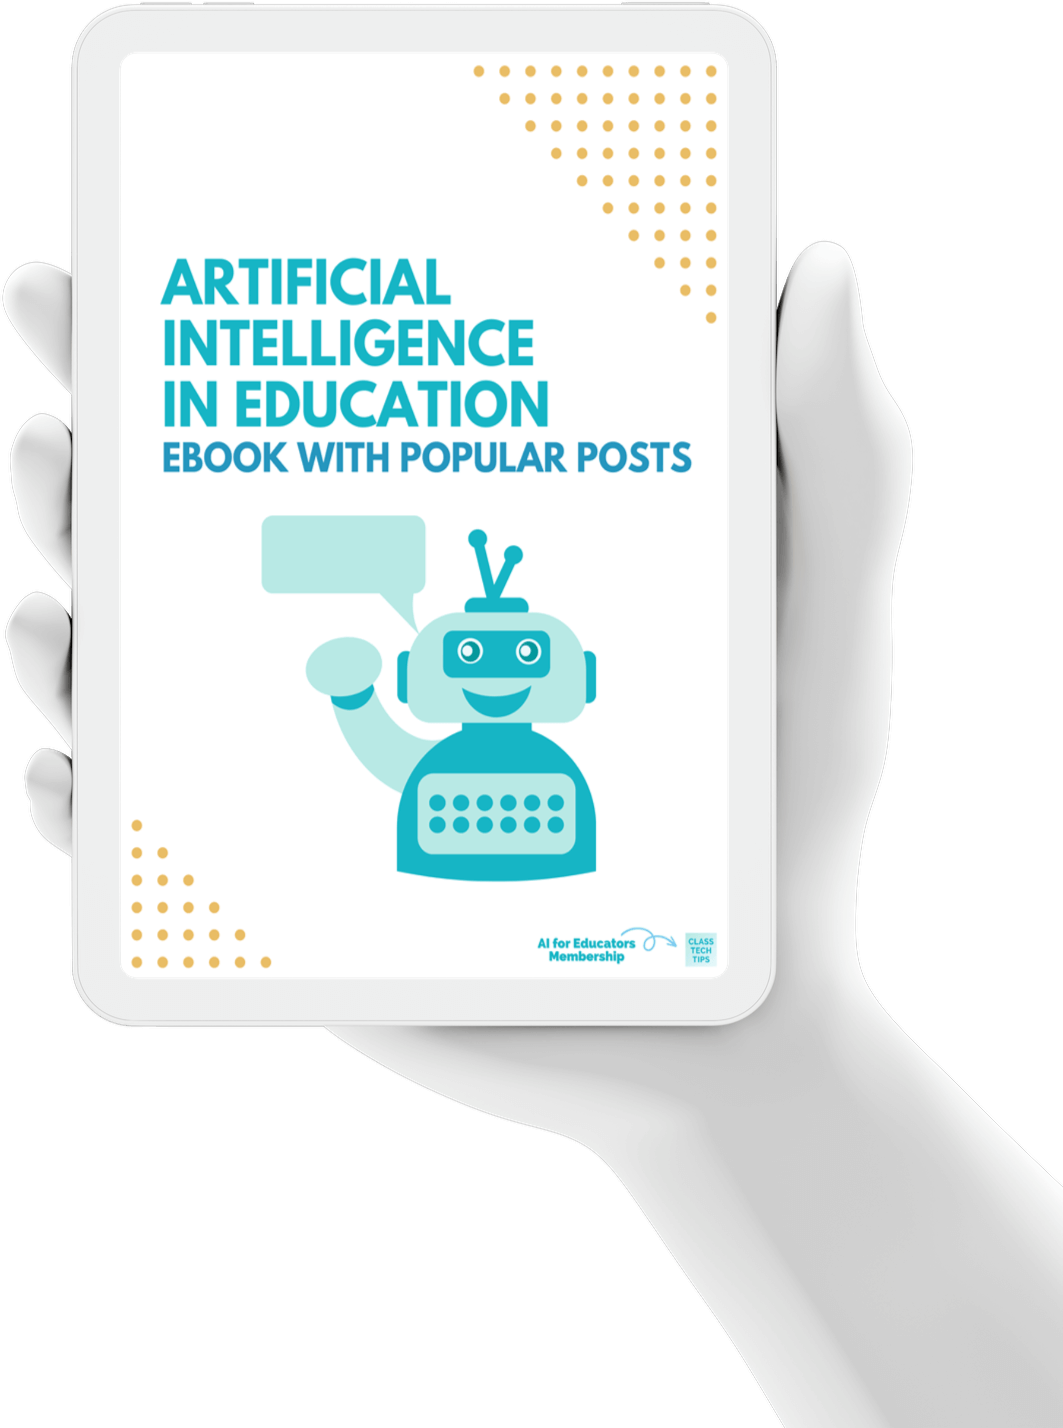 Robot holding an iPad displaying an ebook cover on artificial intelligence, showcasing the integration of technology and AI in education.